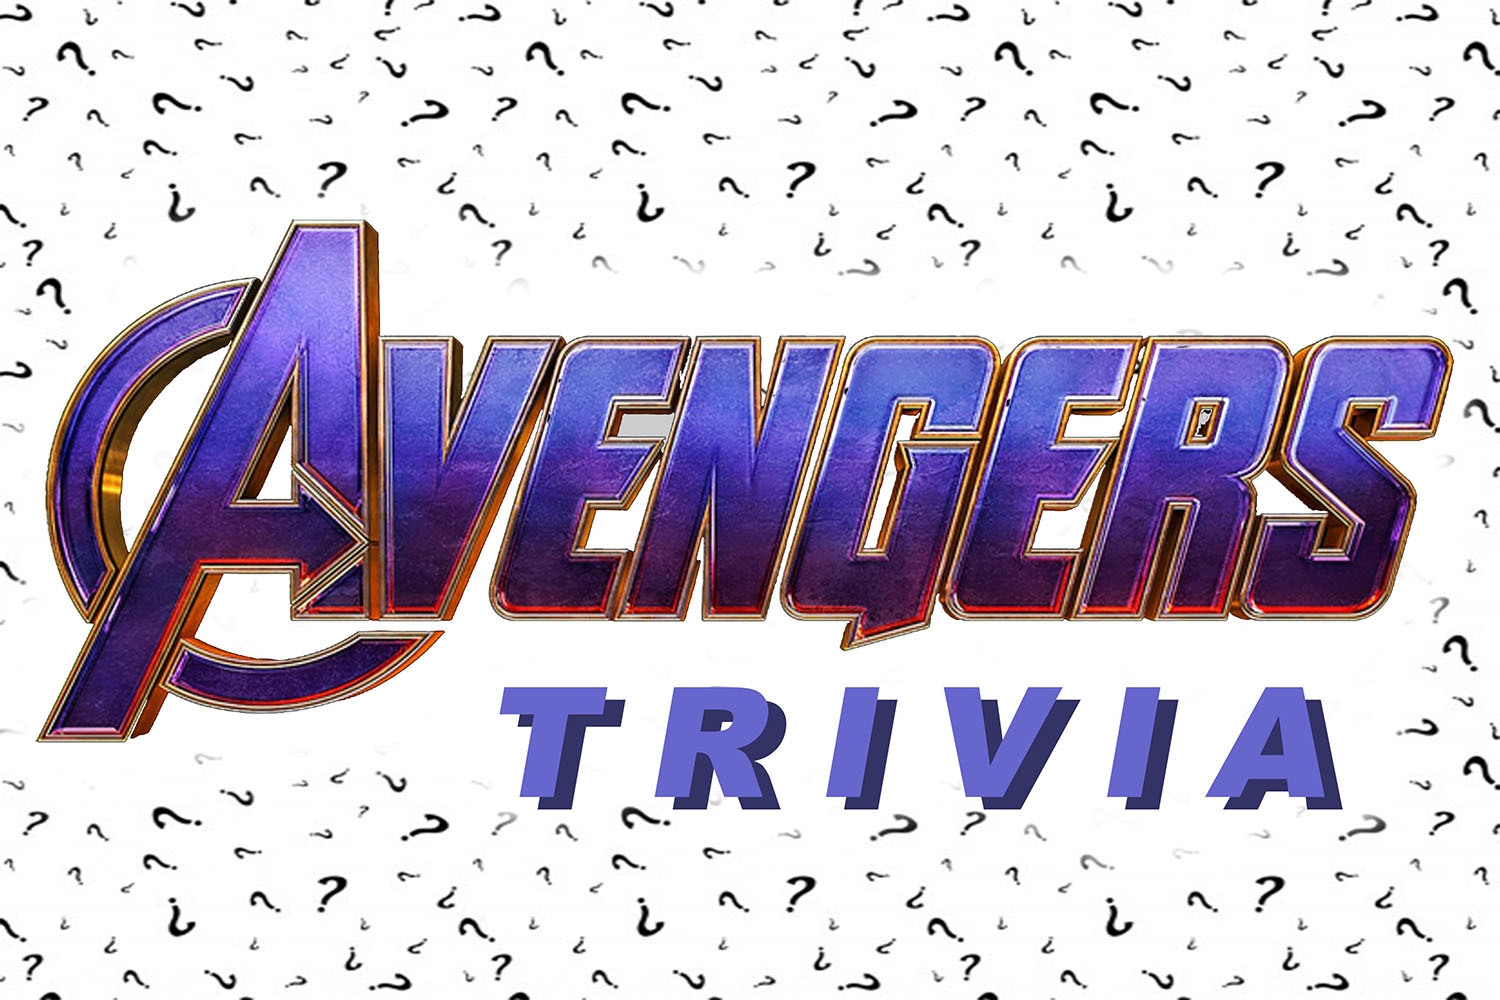 GRAPHIC: Question marks background with text "Avengers trivia" written in purple in forground. Graphic by The Signal reporter Nicole Helpenstill